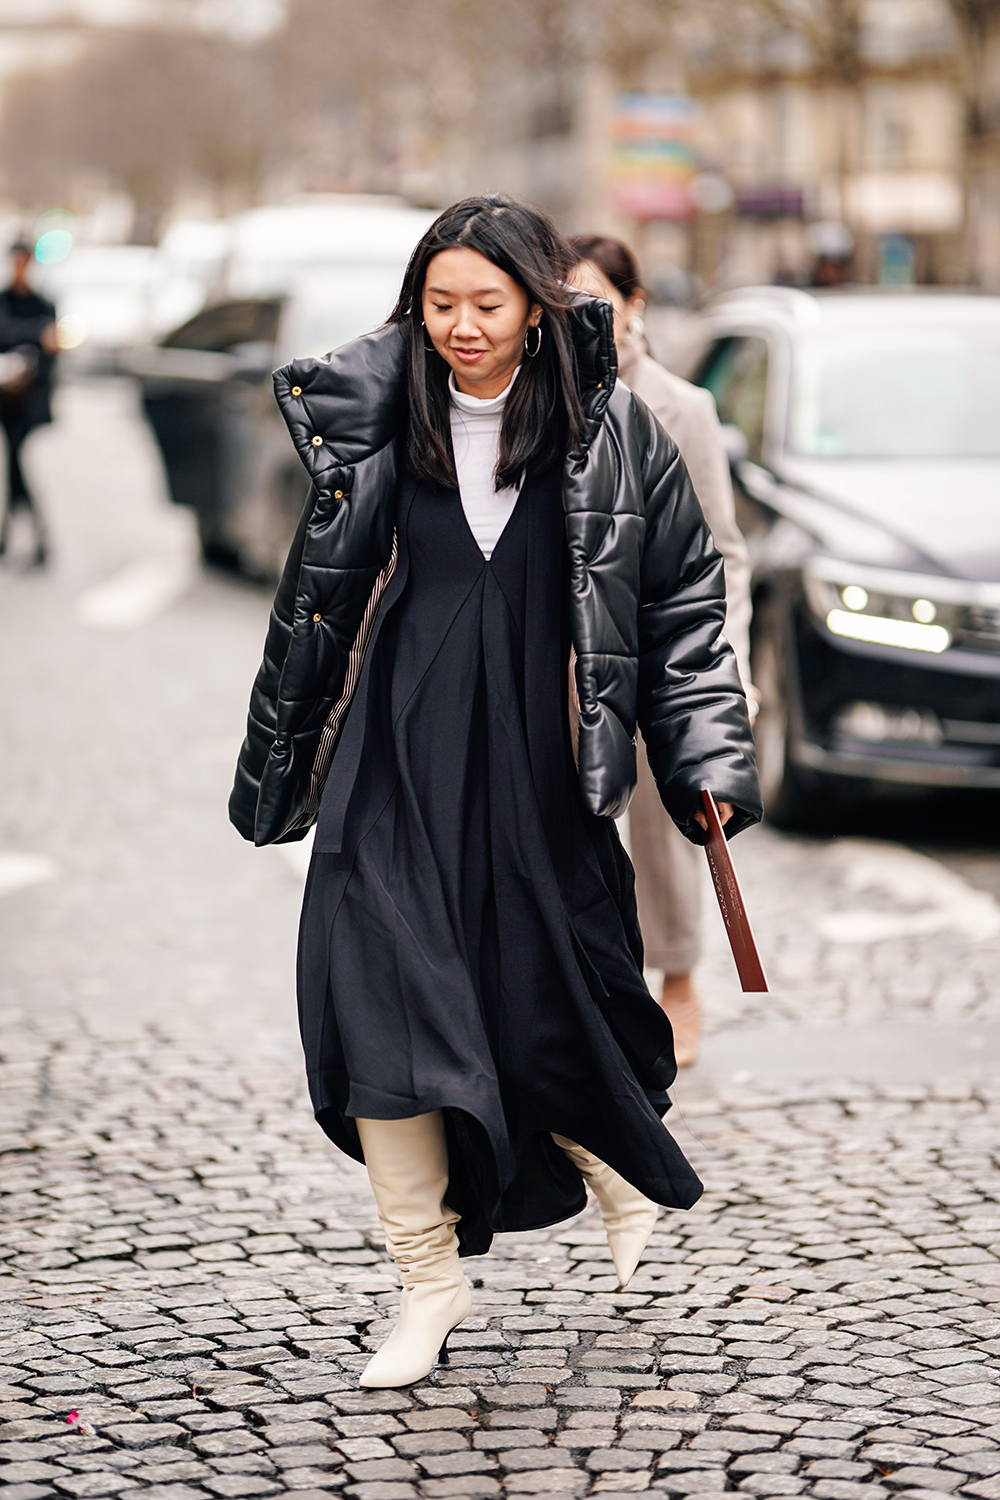 PARIS, FRANCE - MARCH 02: A guest wears earrings, a black puffer jacket, a white turtleneck, a black low-cut pleated dress, white pointy high-heeled boots, outside Altuzarra, during Paris Fashion Week Womenswear Fall/Winter 2019/2020, on March 02, 2019 in Paris, France. (Photo by Edward Berthelot/Getty Images)